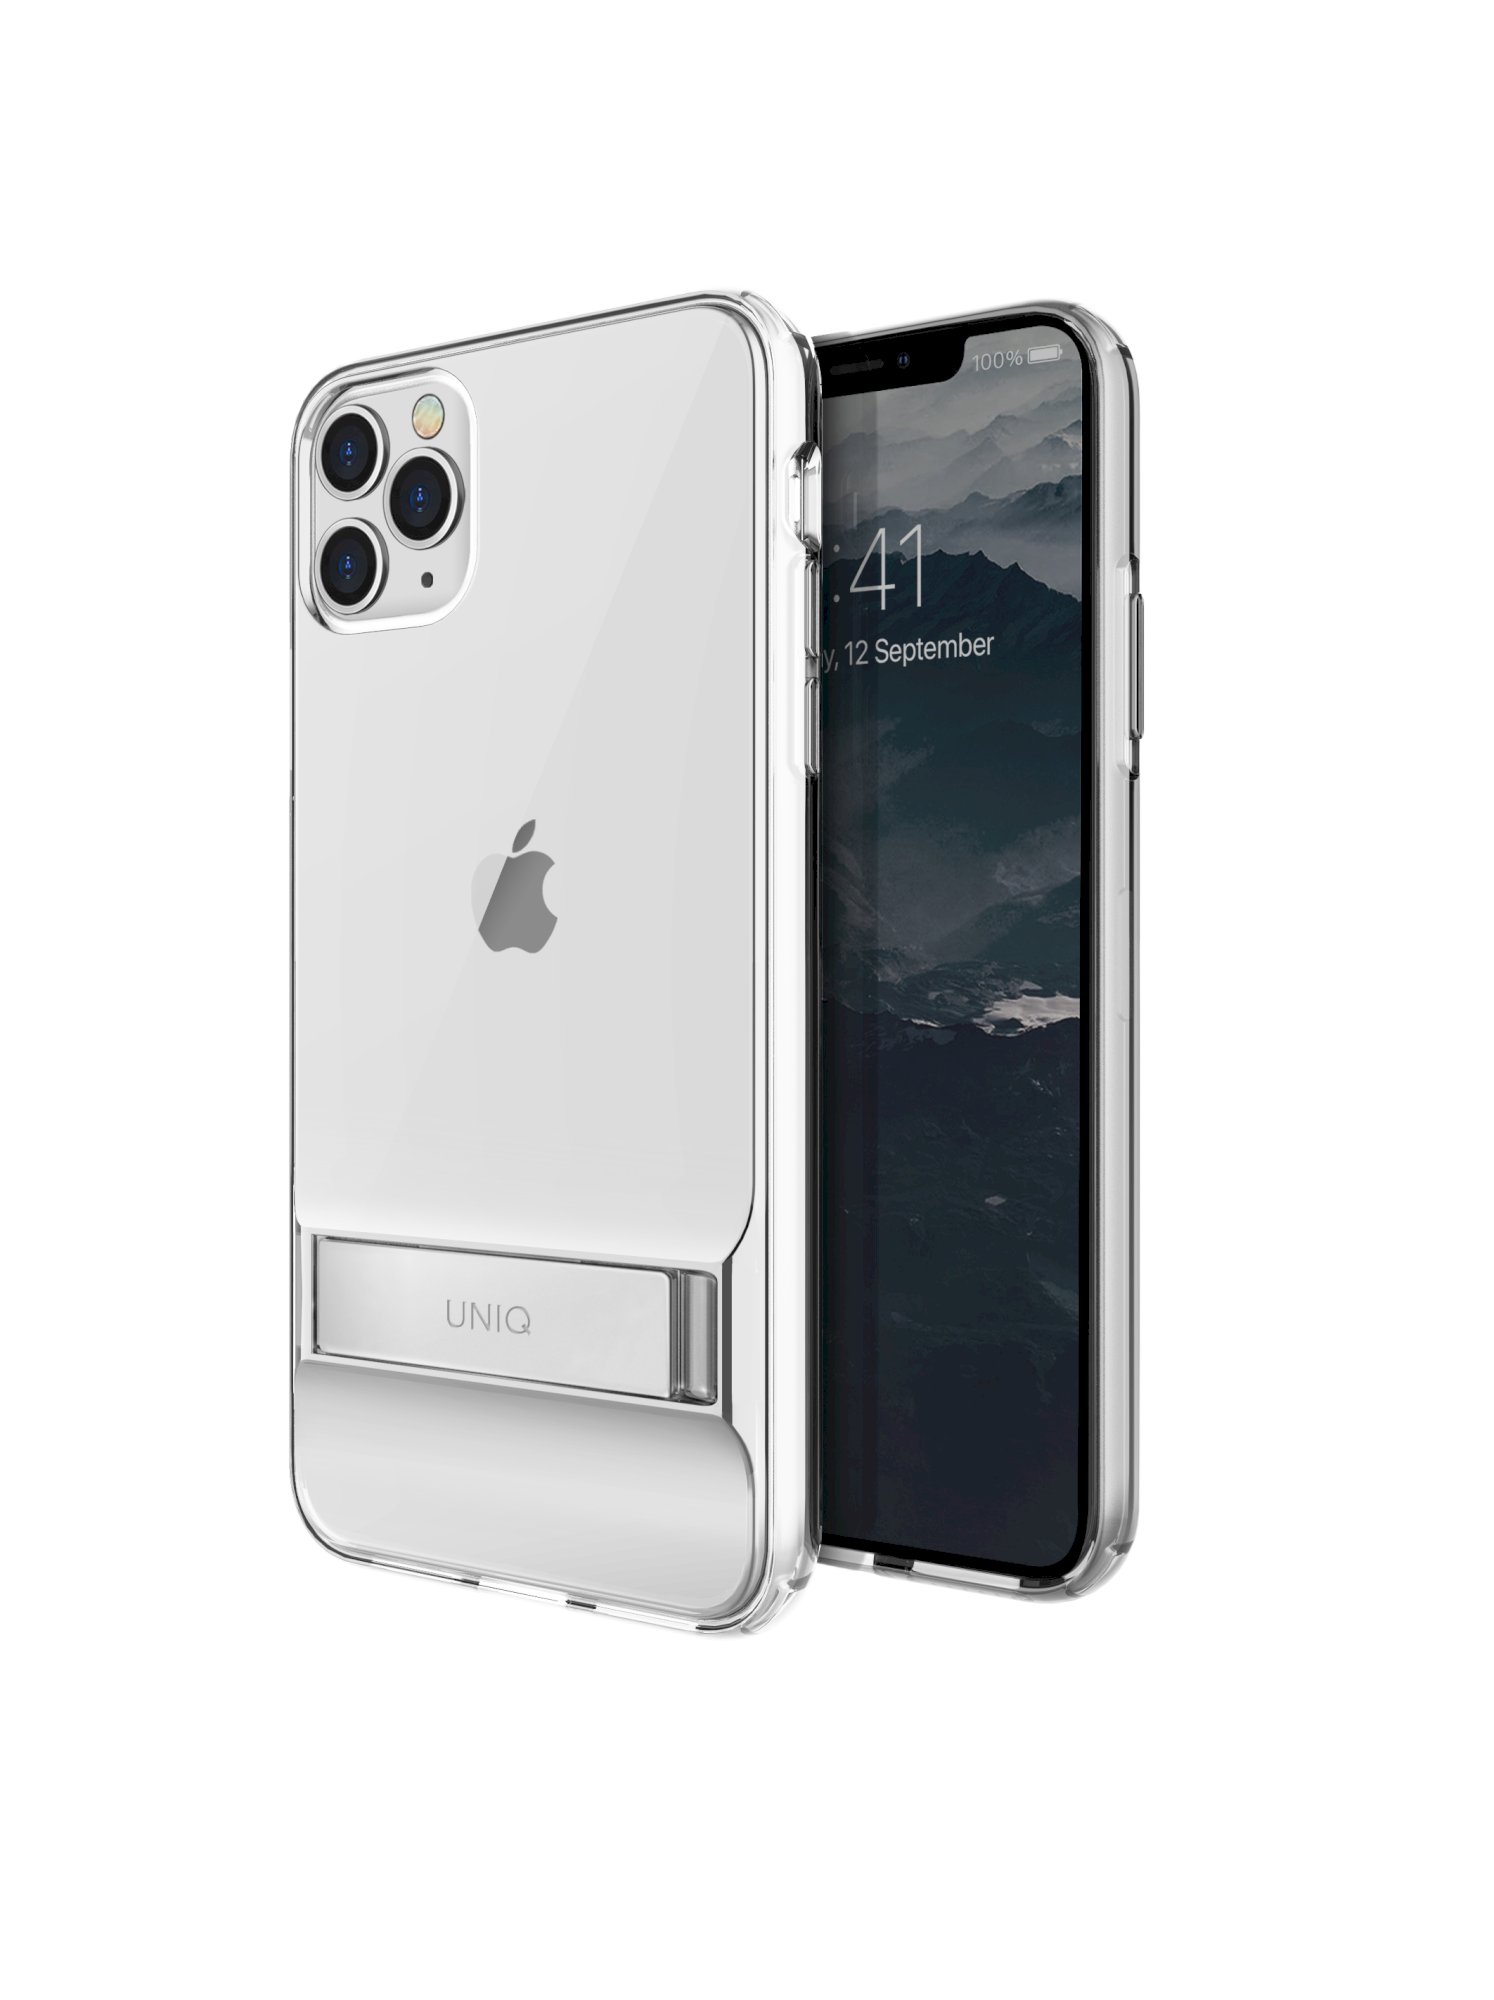 iPhone 11 Pro Max, case cabrio, stand up crystal, transparent